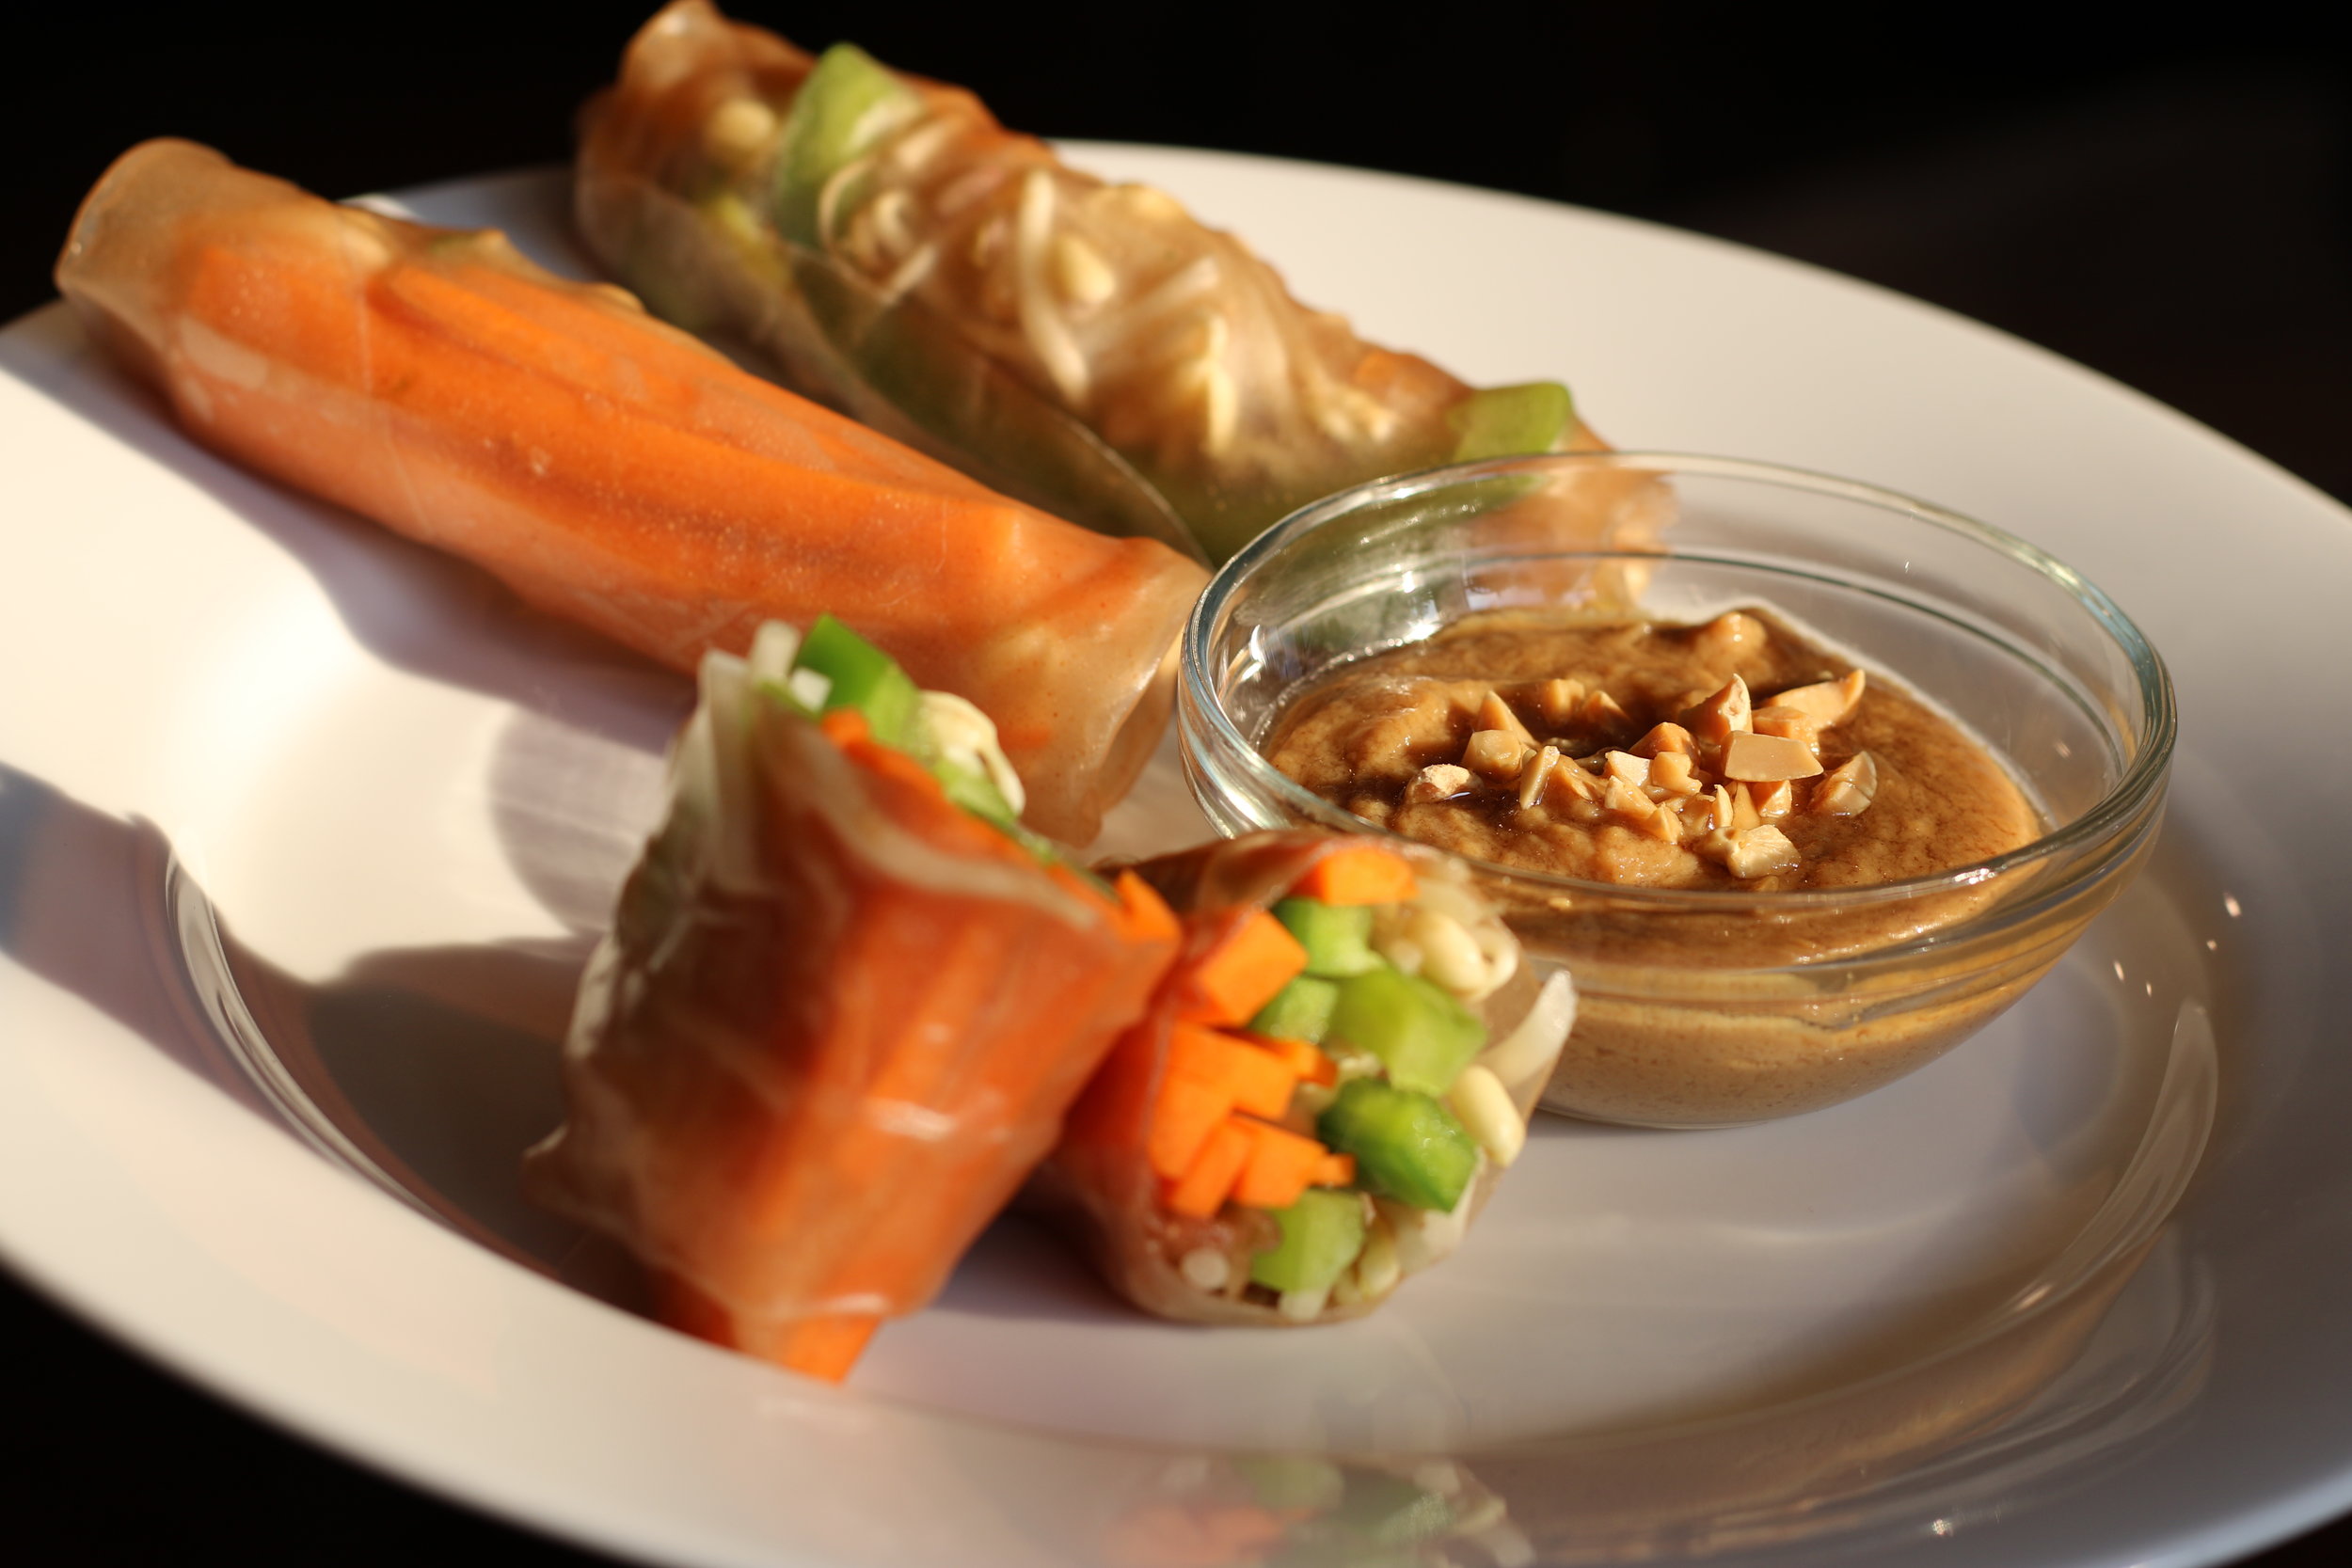 Alt text: a white plate holds vegetable spring rolls in rice wraps along with a small dish of peanut butter sauce. The light is very moody with sharp shadows.